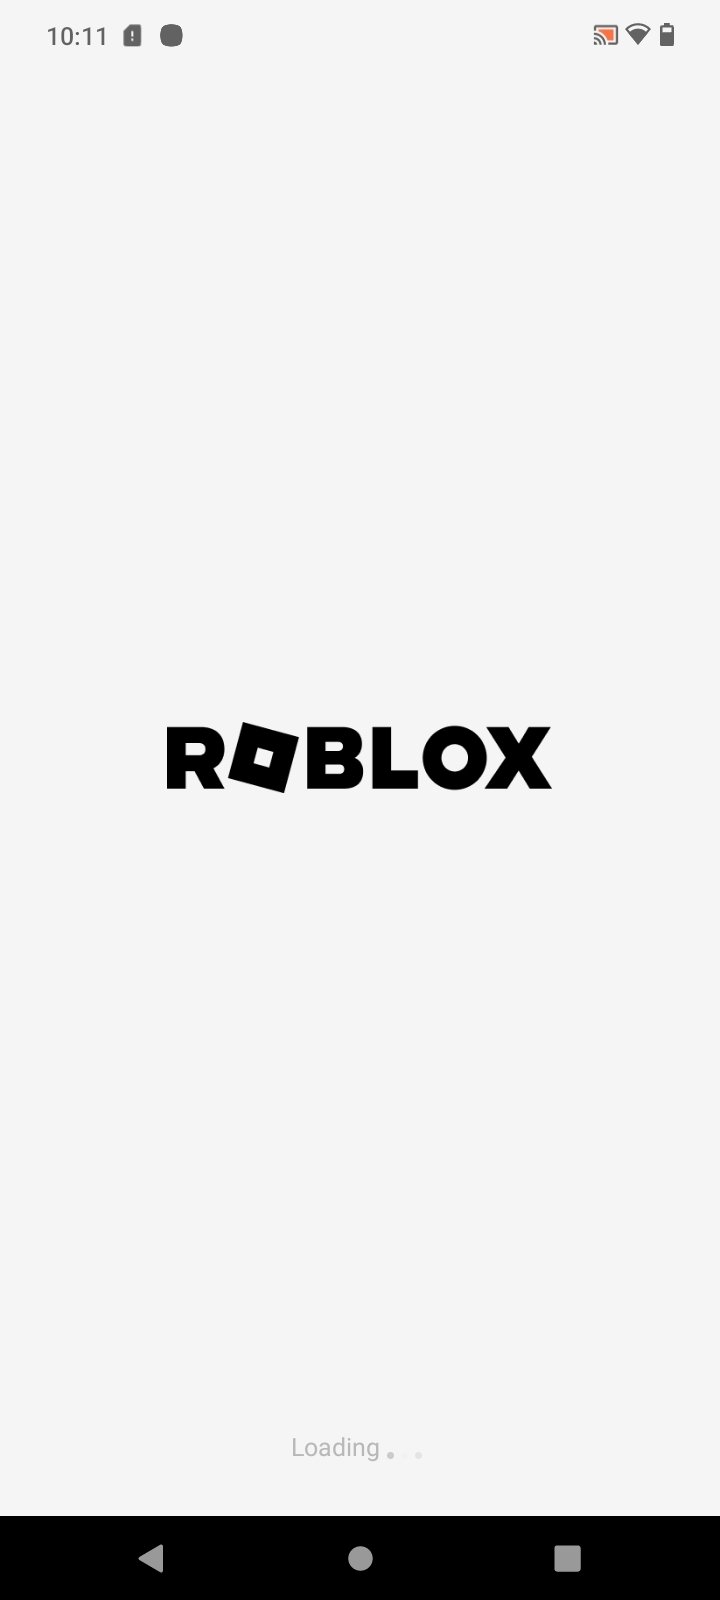 ROBLOX ANDROID EXECUTOR FOR MOBILE! 